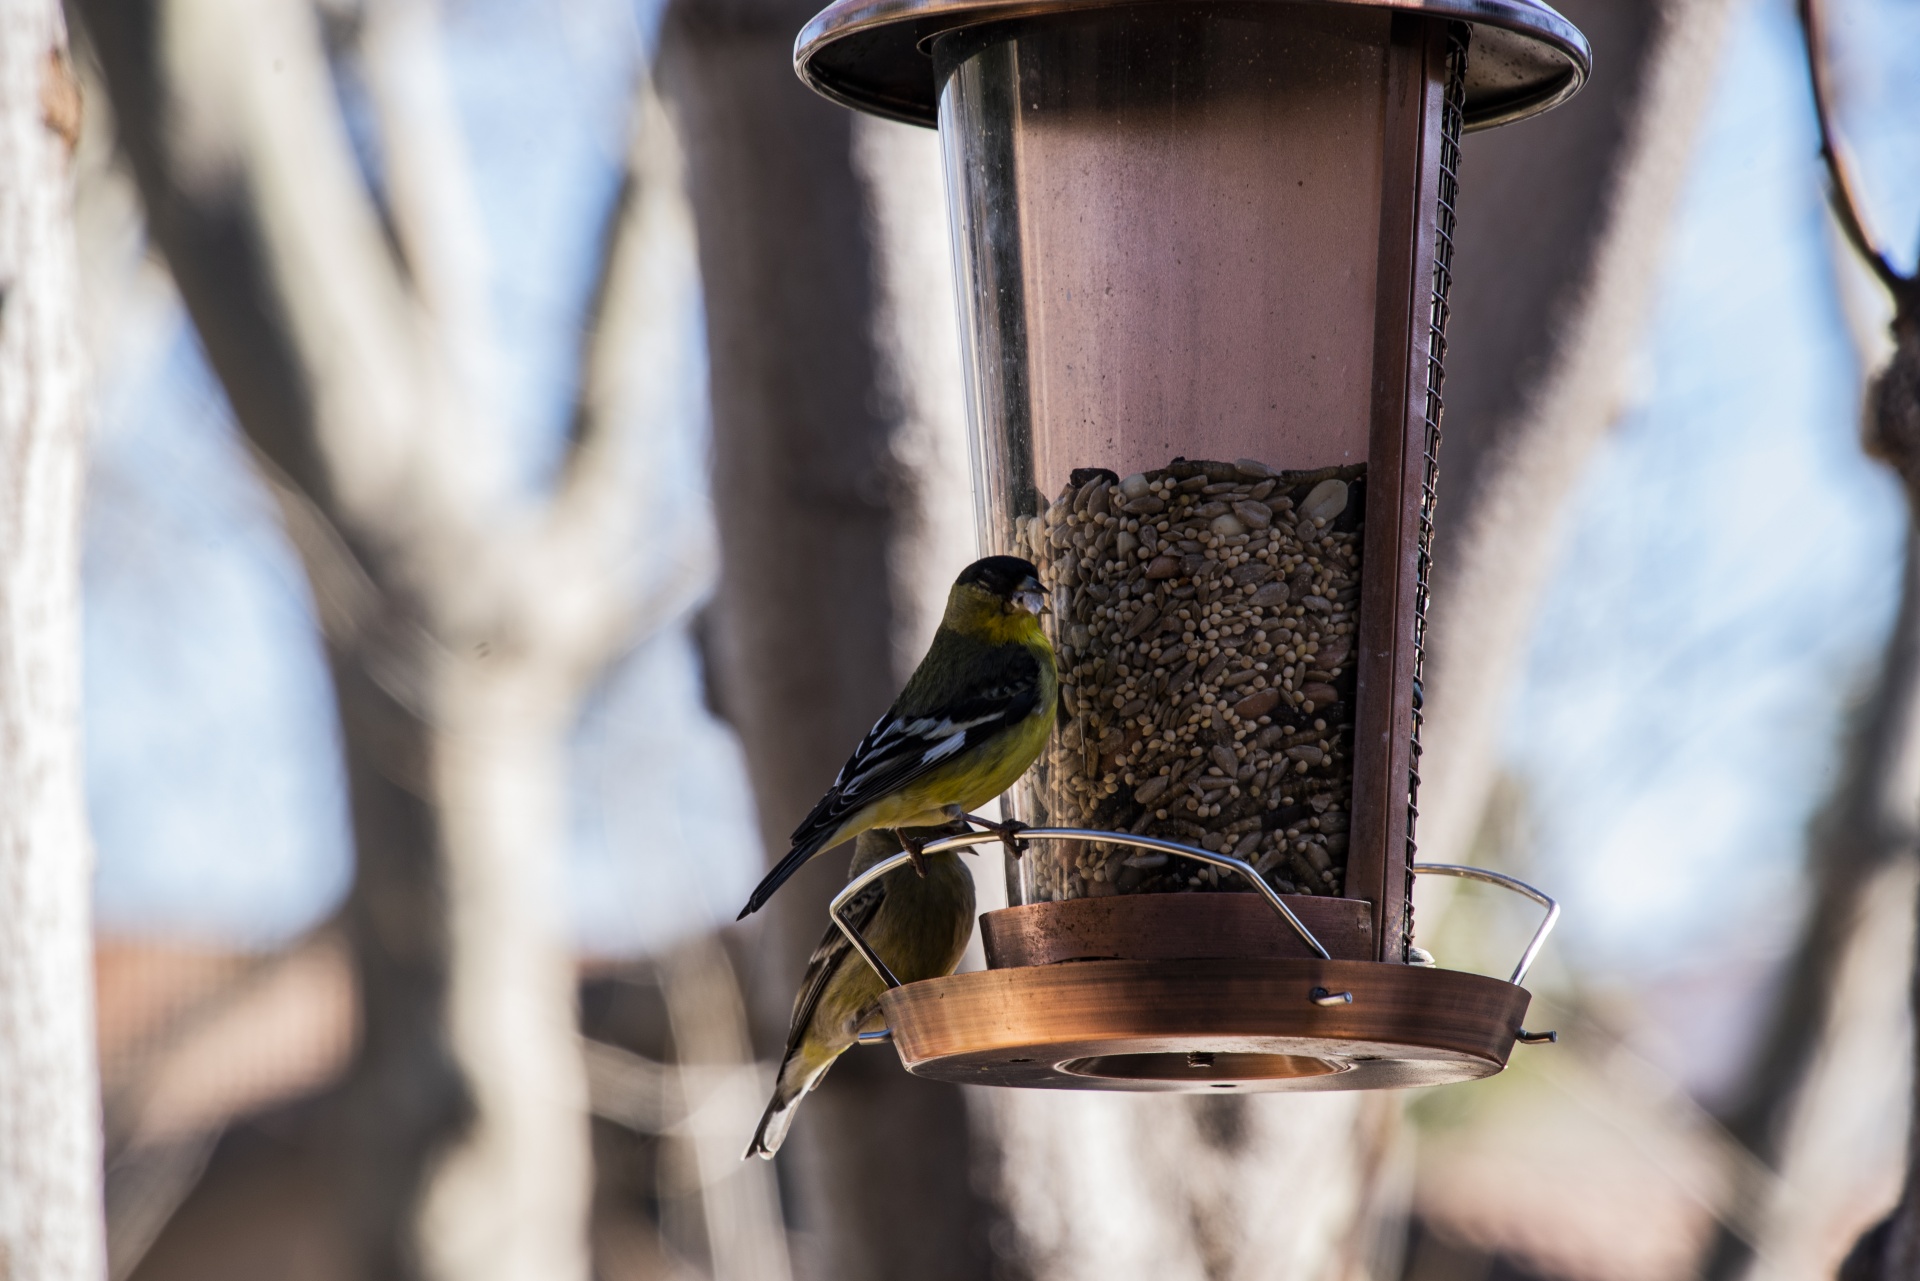 Two Yellow Finches